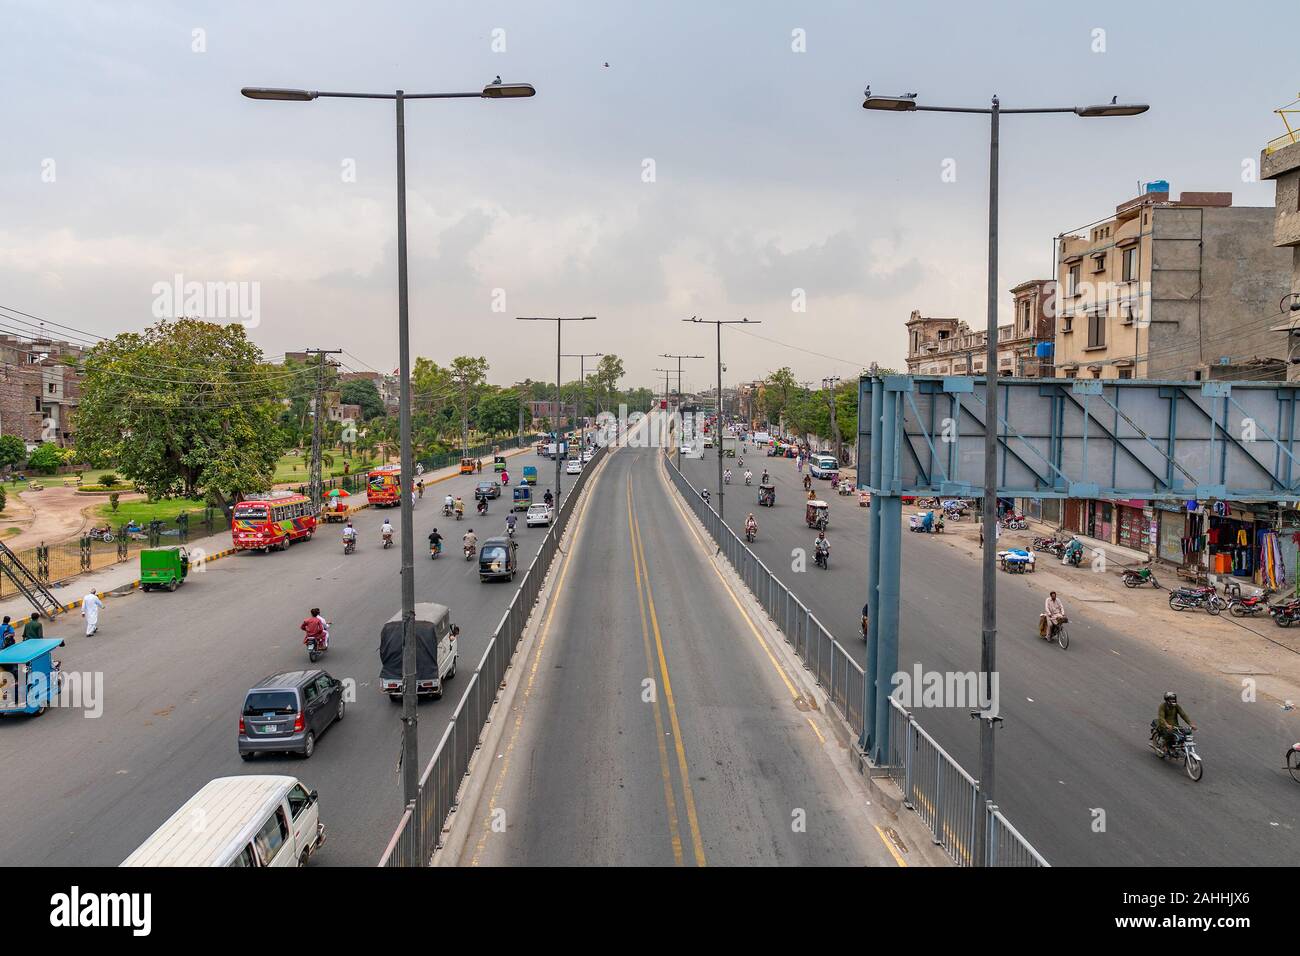 Lahore Data Darbar Road Picturesque View with Busy Traffic on a Cloudy Blue Sky Day Stock Photo